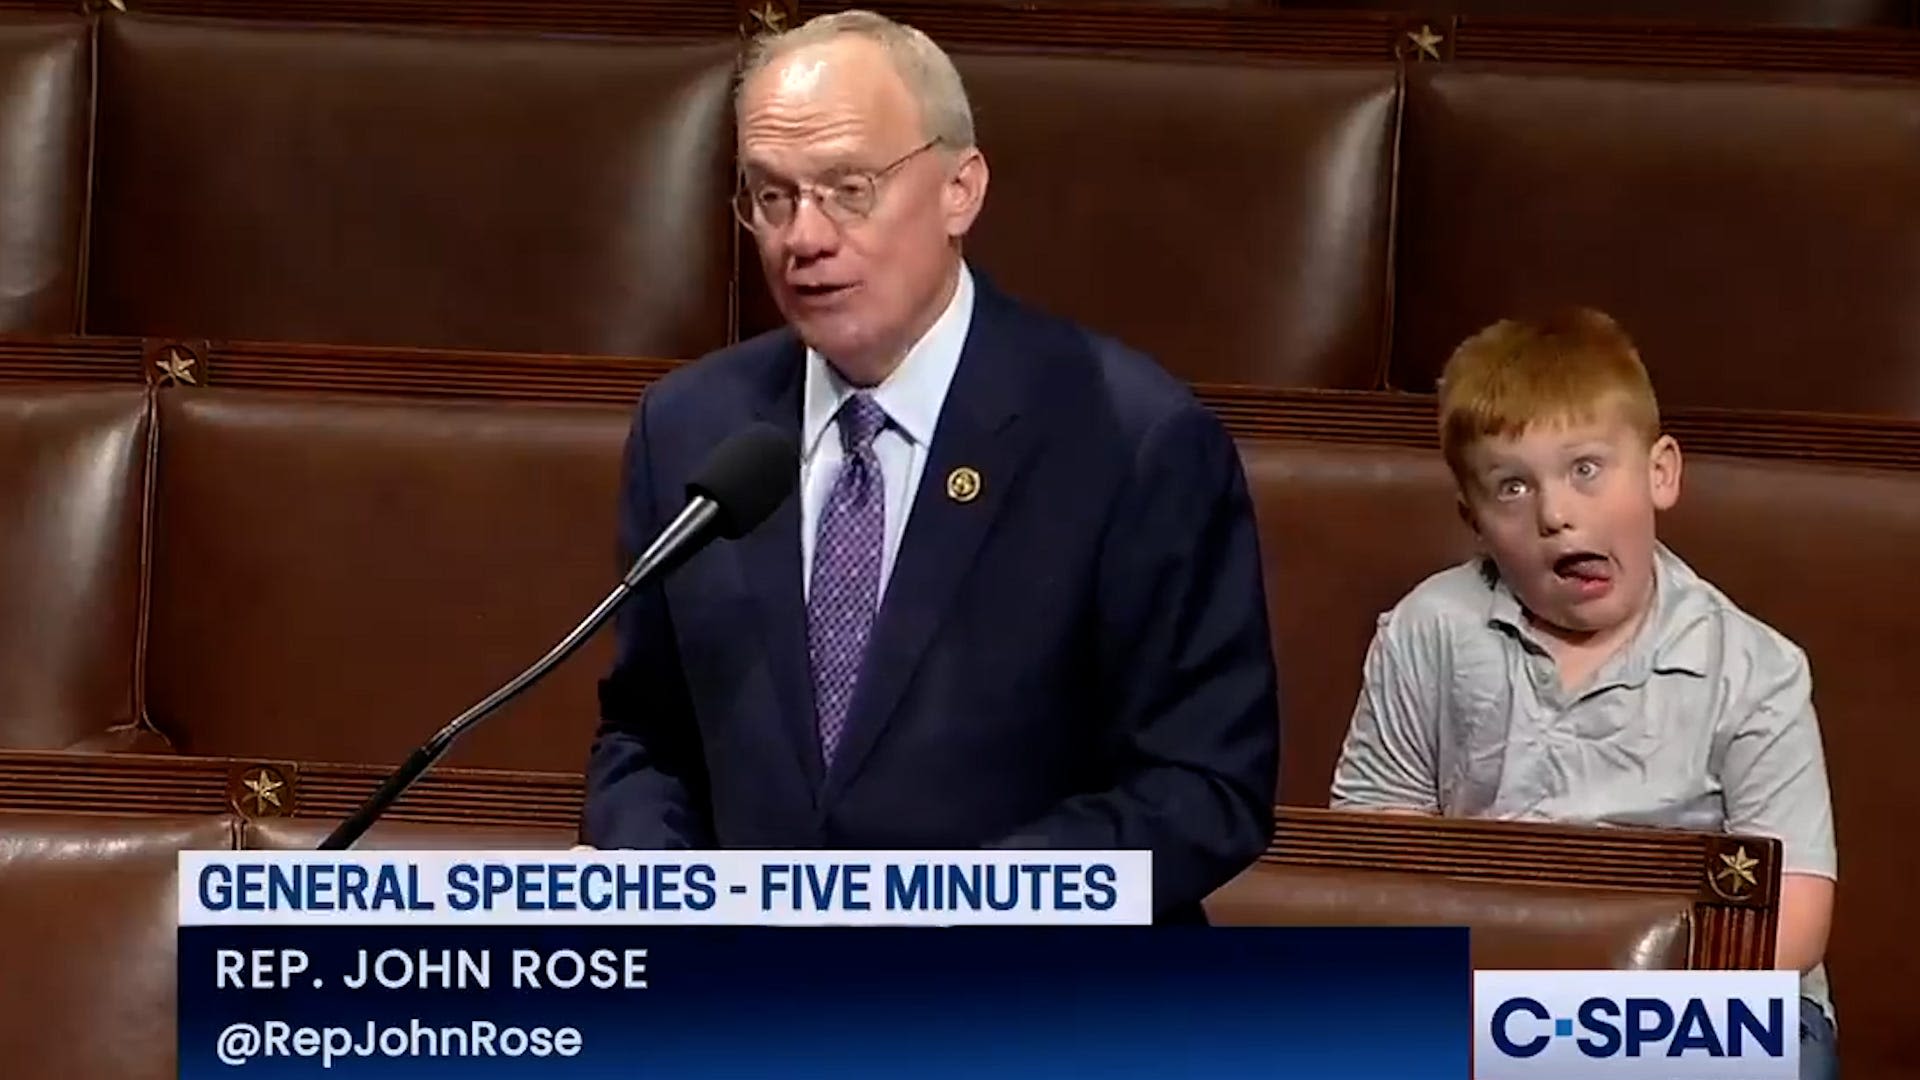 Tennessee politician's 6-year-old son upstages House speech with silly faces: Watch